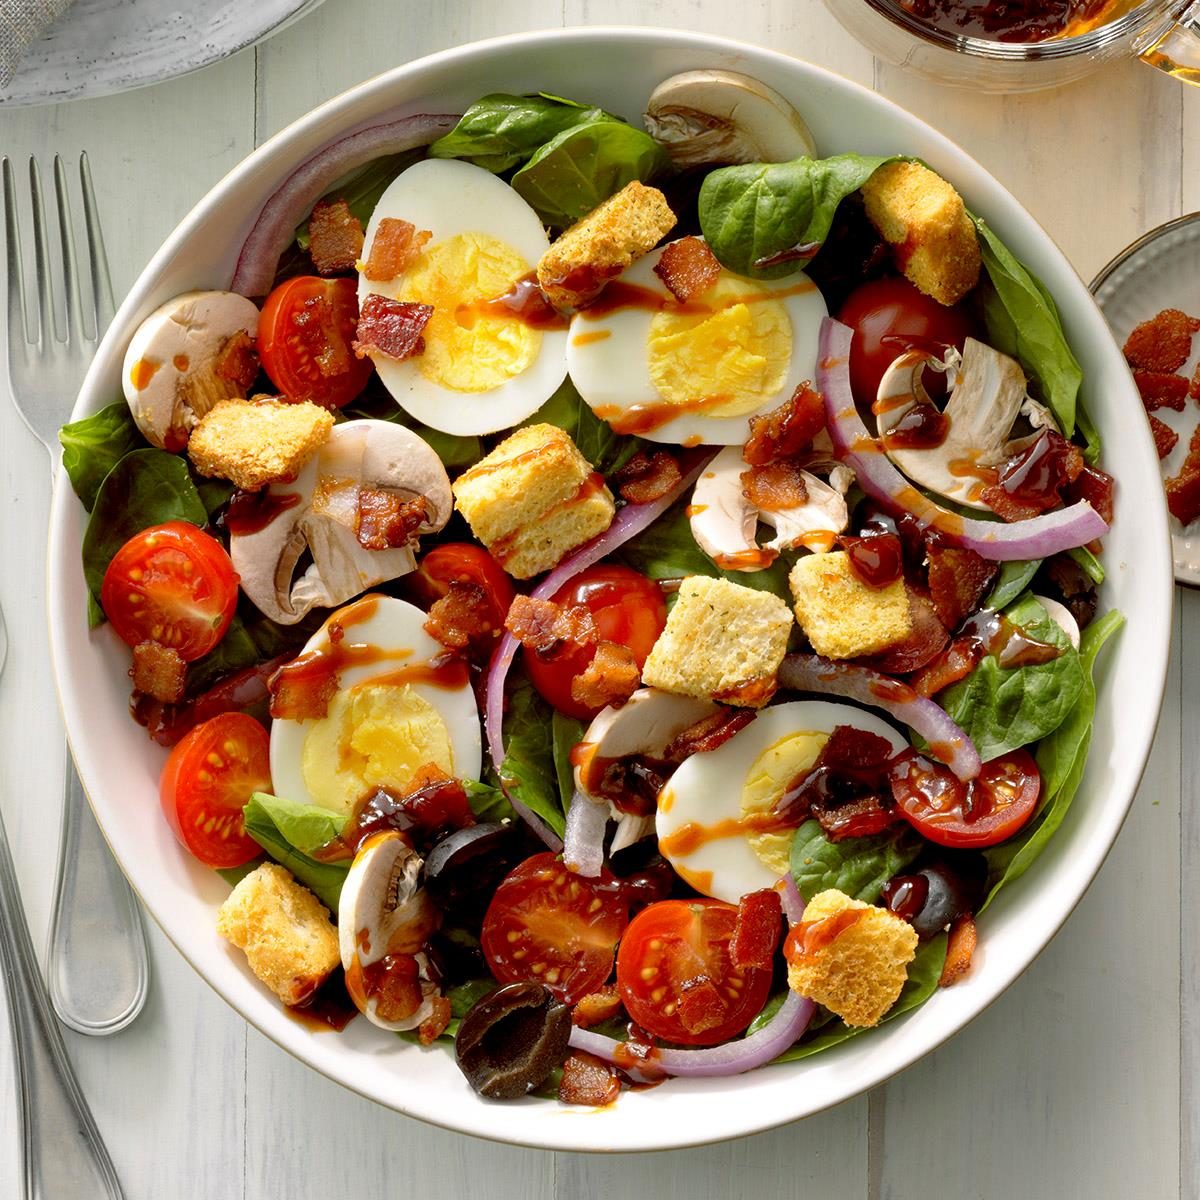 Spinach Salad With Hot Bacon Dressing Exps Cf2bz20 46121 E12 06 4b 13